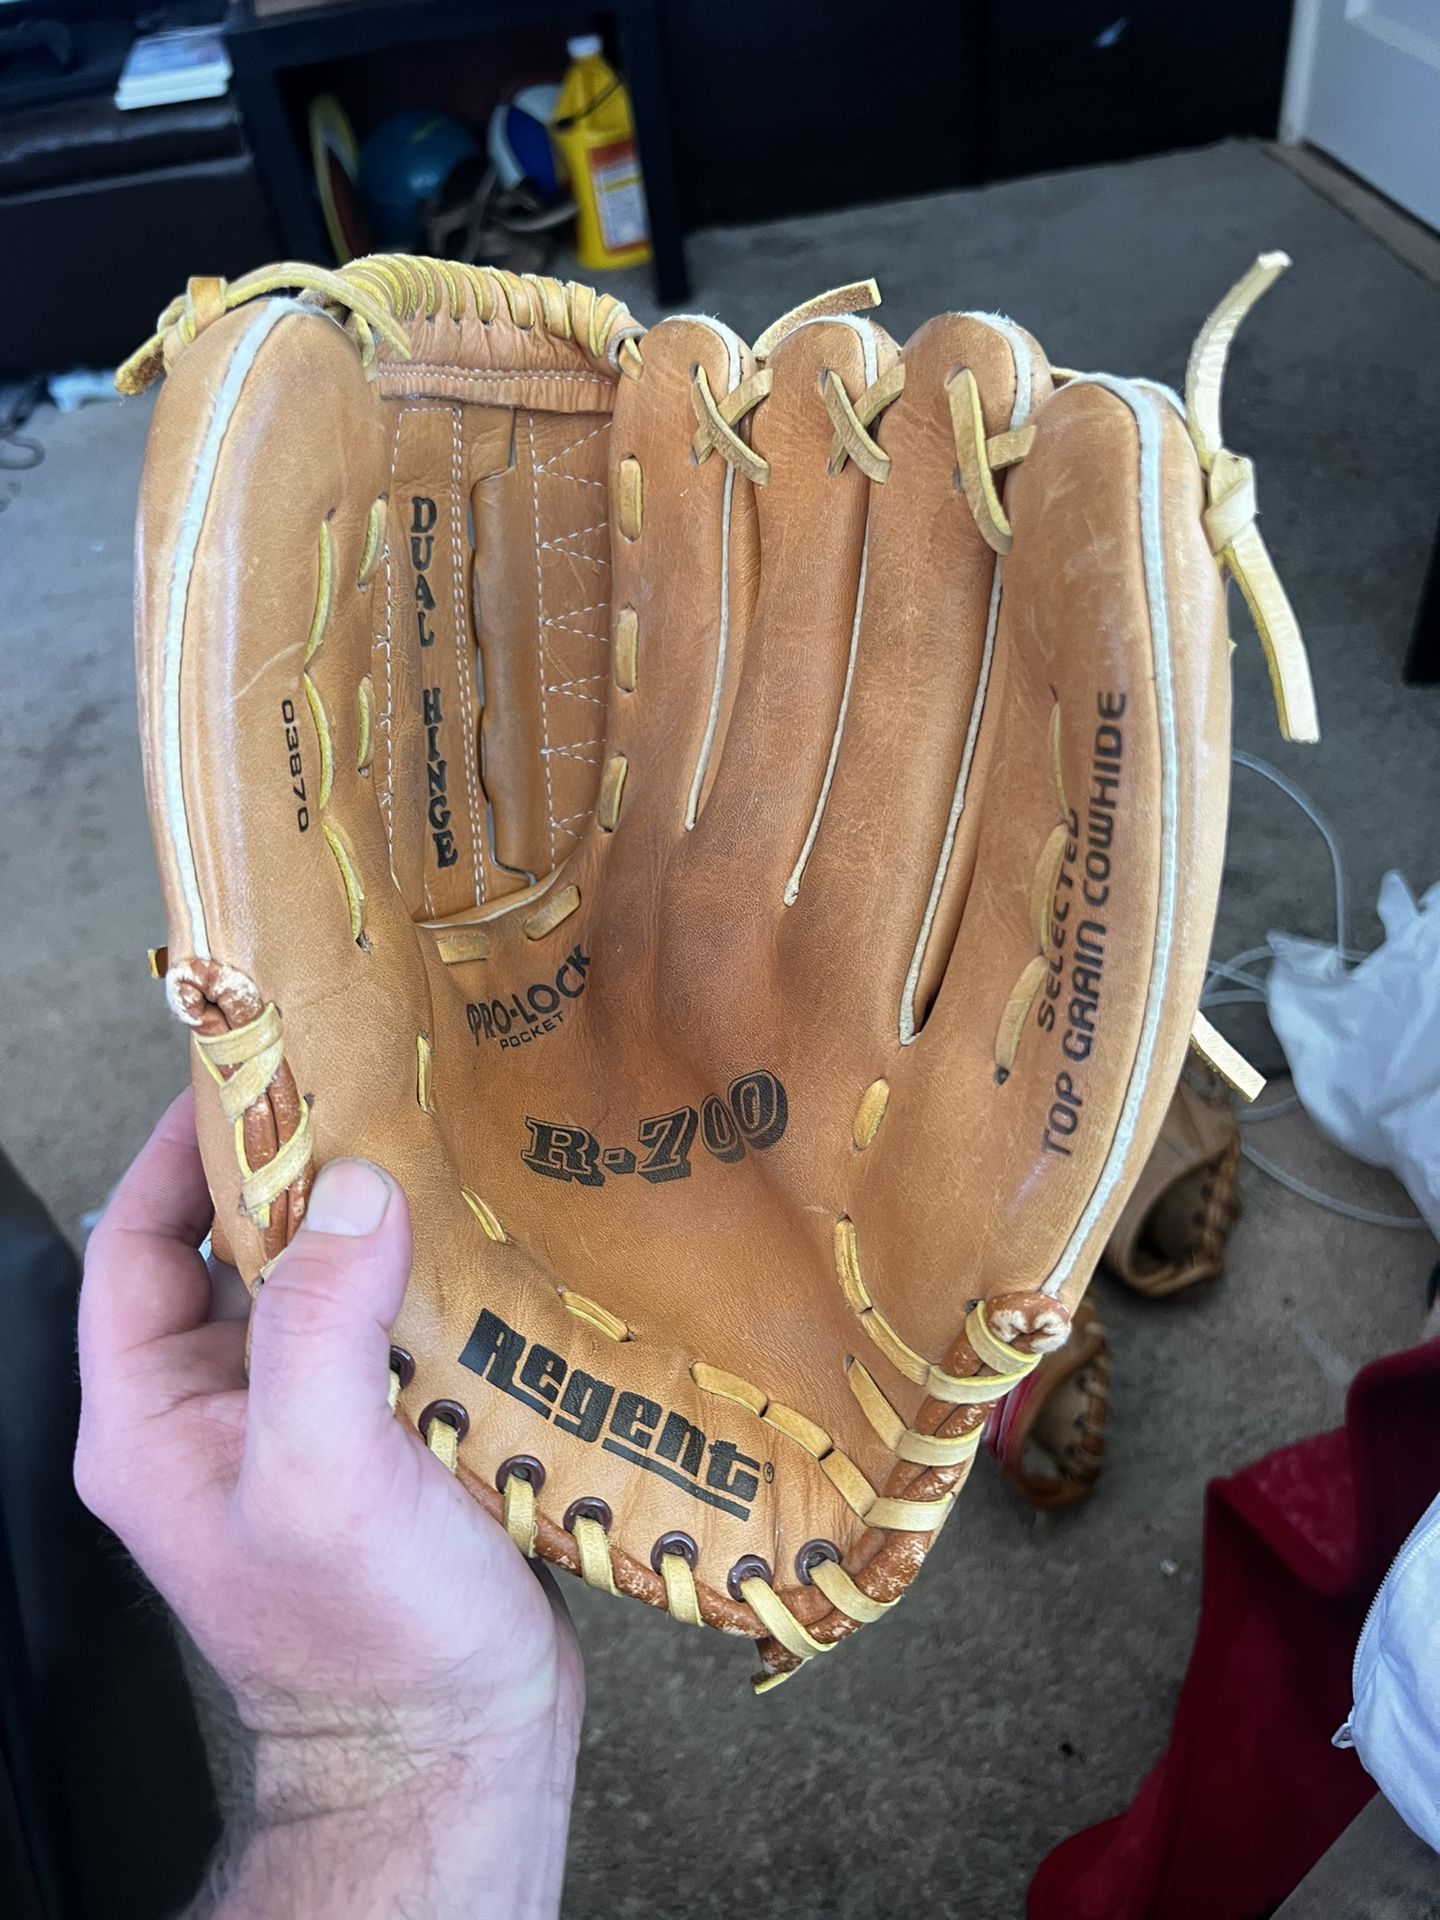 Regent R-700 Softball/ Baseball Adult Glove Like New Quality Leather $30 Have Cheaper And Smaller Gloves Too Righty Right Handed Thrower RHT